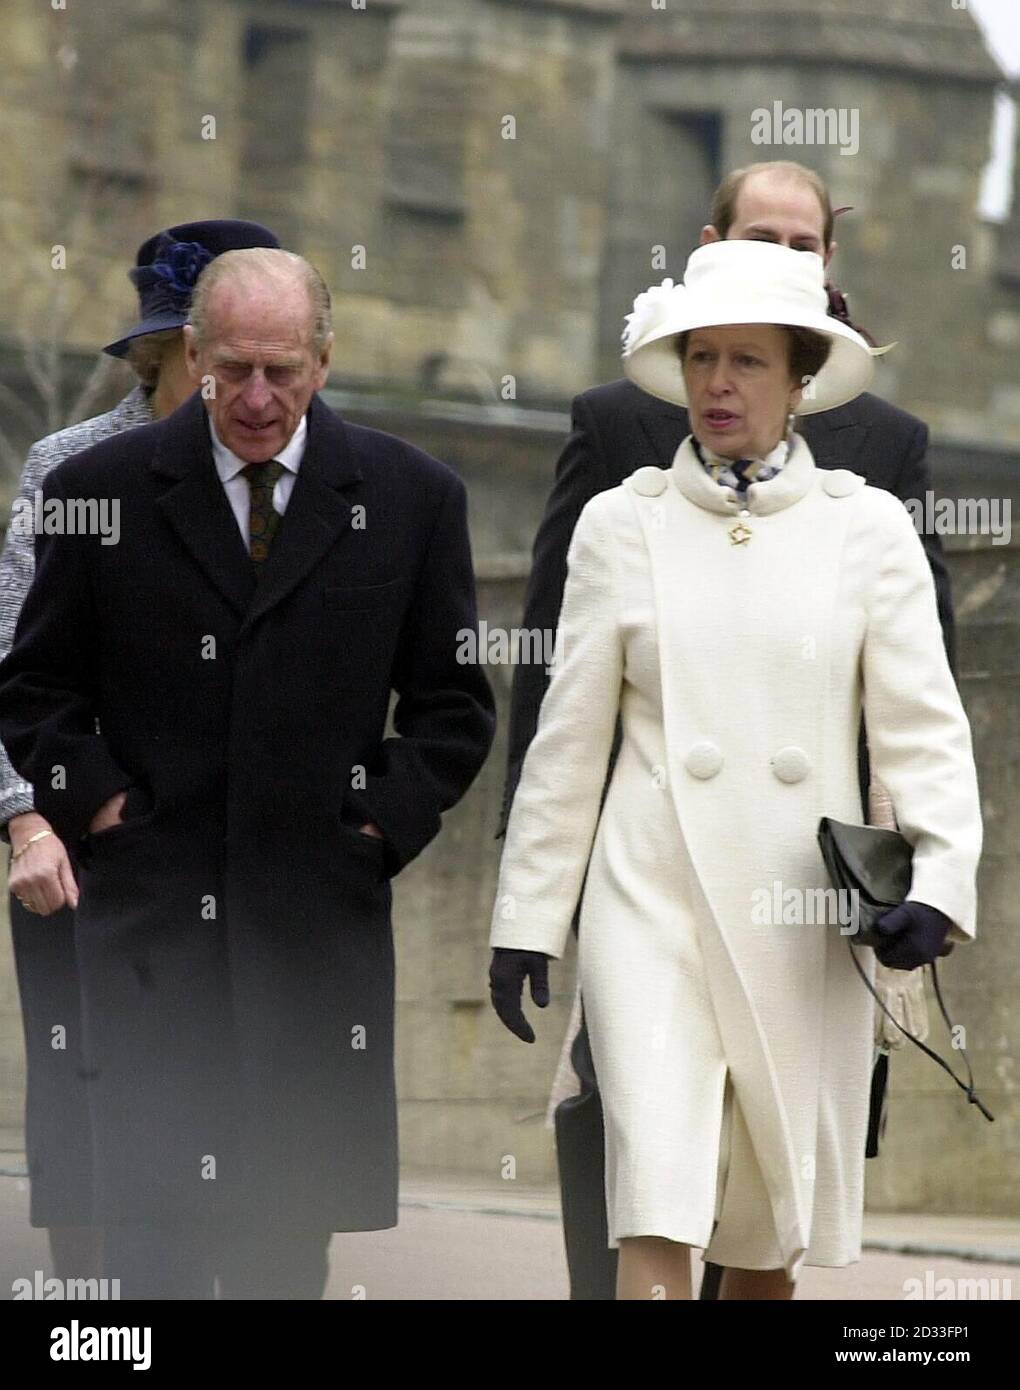 The Duke of Edinburgh with the Princess Royal arriving  at the chapel at Windsor Castle for the traditional Easter Sunday church service. Nine senior members of the family were present for the service at St George's chapel in the castle grounds, which was led by the Dean of Windsor, the Right Rev David Conner. Around 200 members of the public braved the cold, grey morning to see the royals arrive for what has become an annual gathering of the Royal Family. Stock Photo